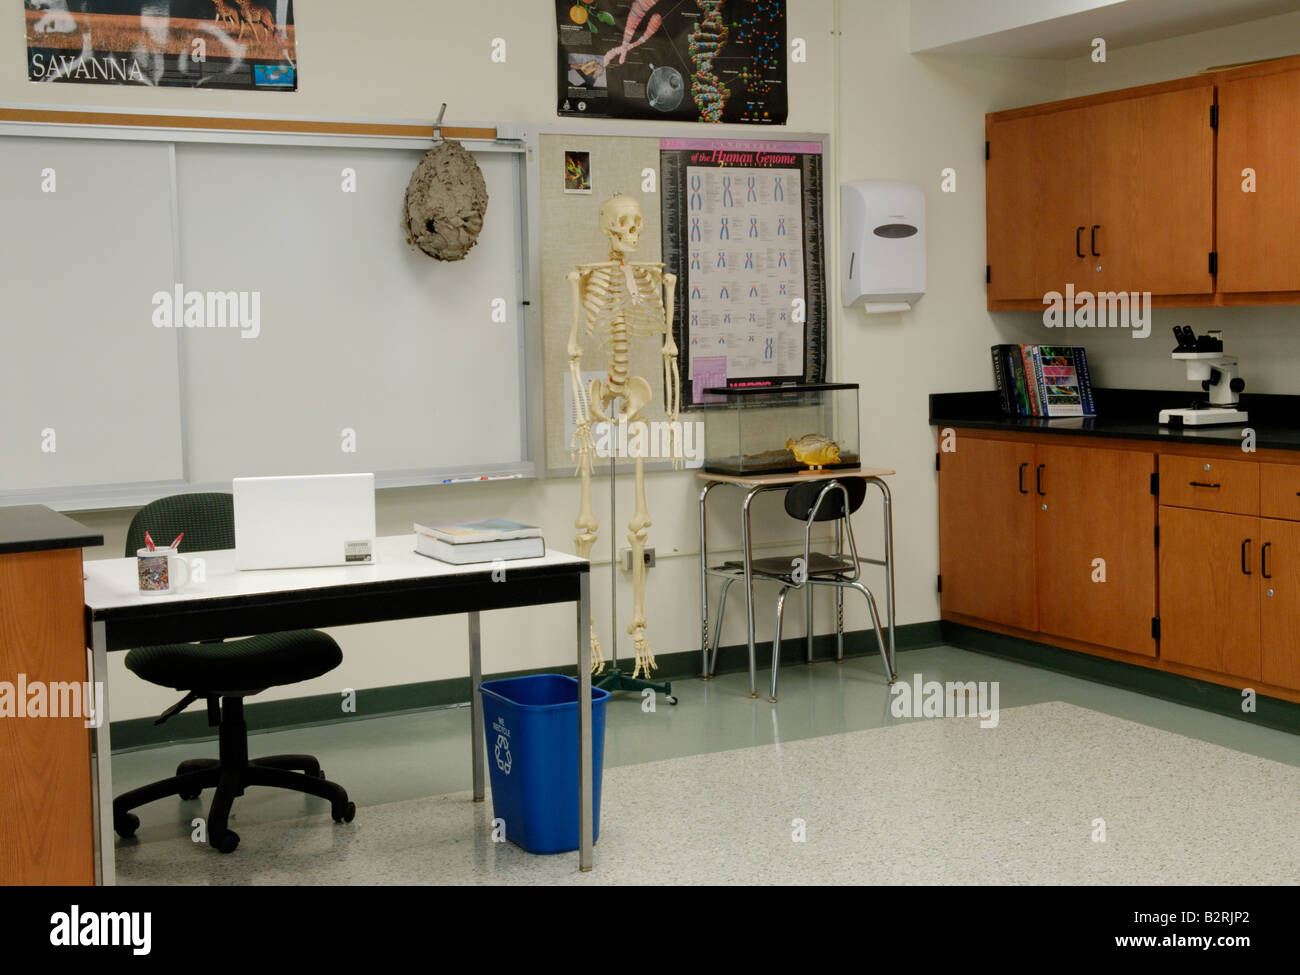 A modern science classroom with a teacher desk laptop and science posters Stock Photo